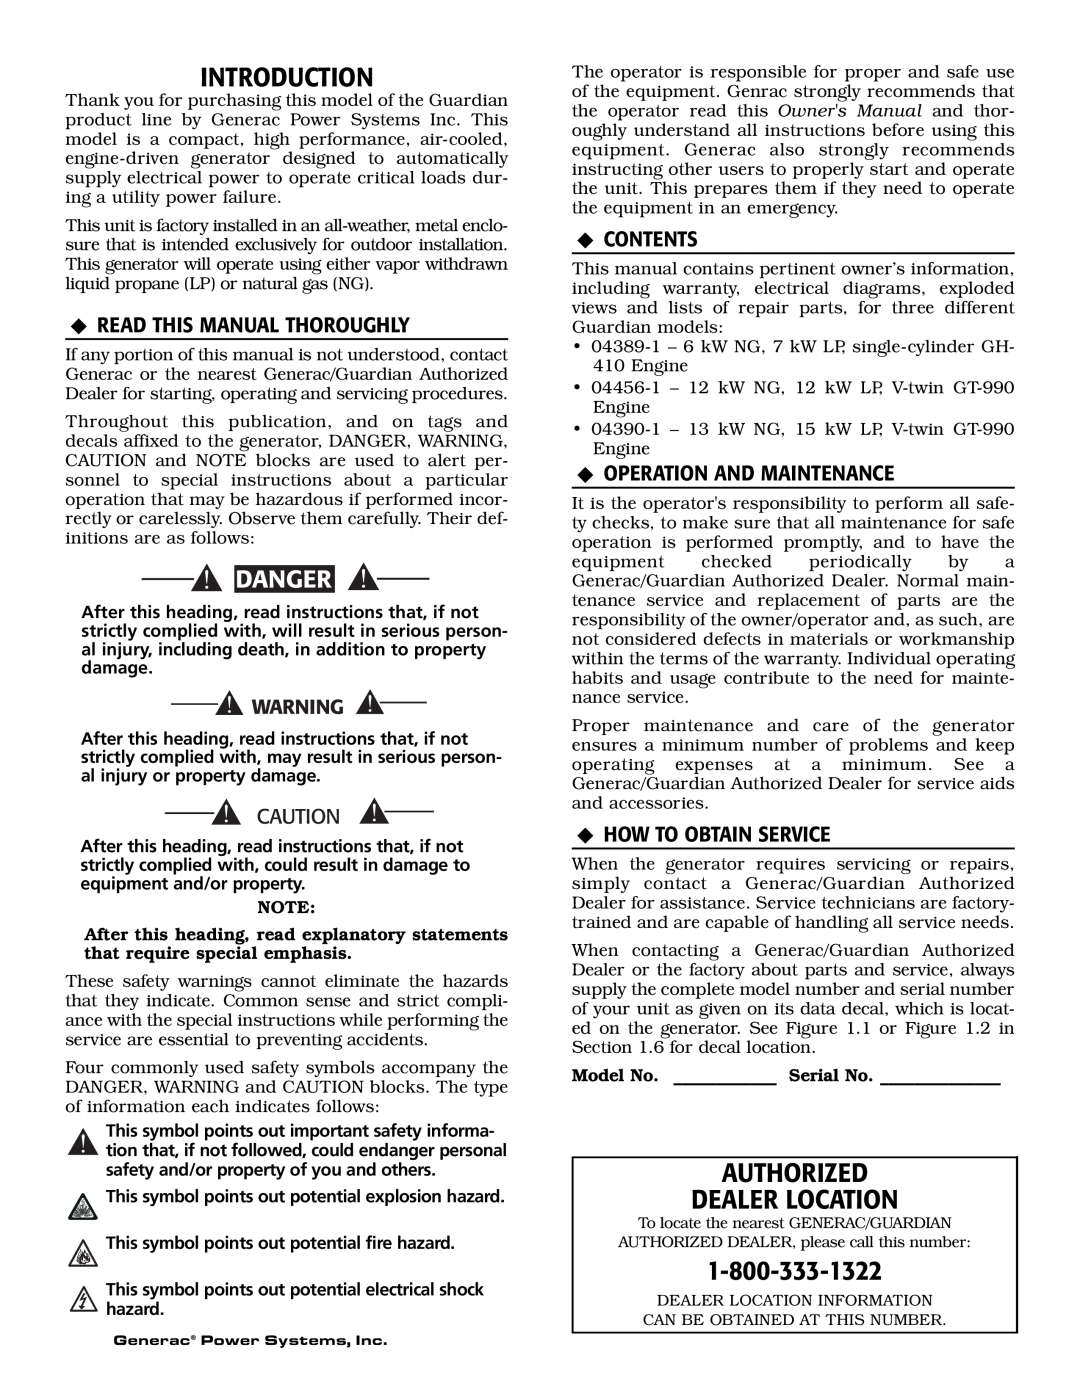 Generac Power Systems 04389-1 Introduction, Authorized Dealer Location, Danger, ‹Read This Manual Thoroughly, ‹Contents 